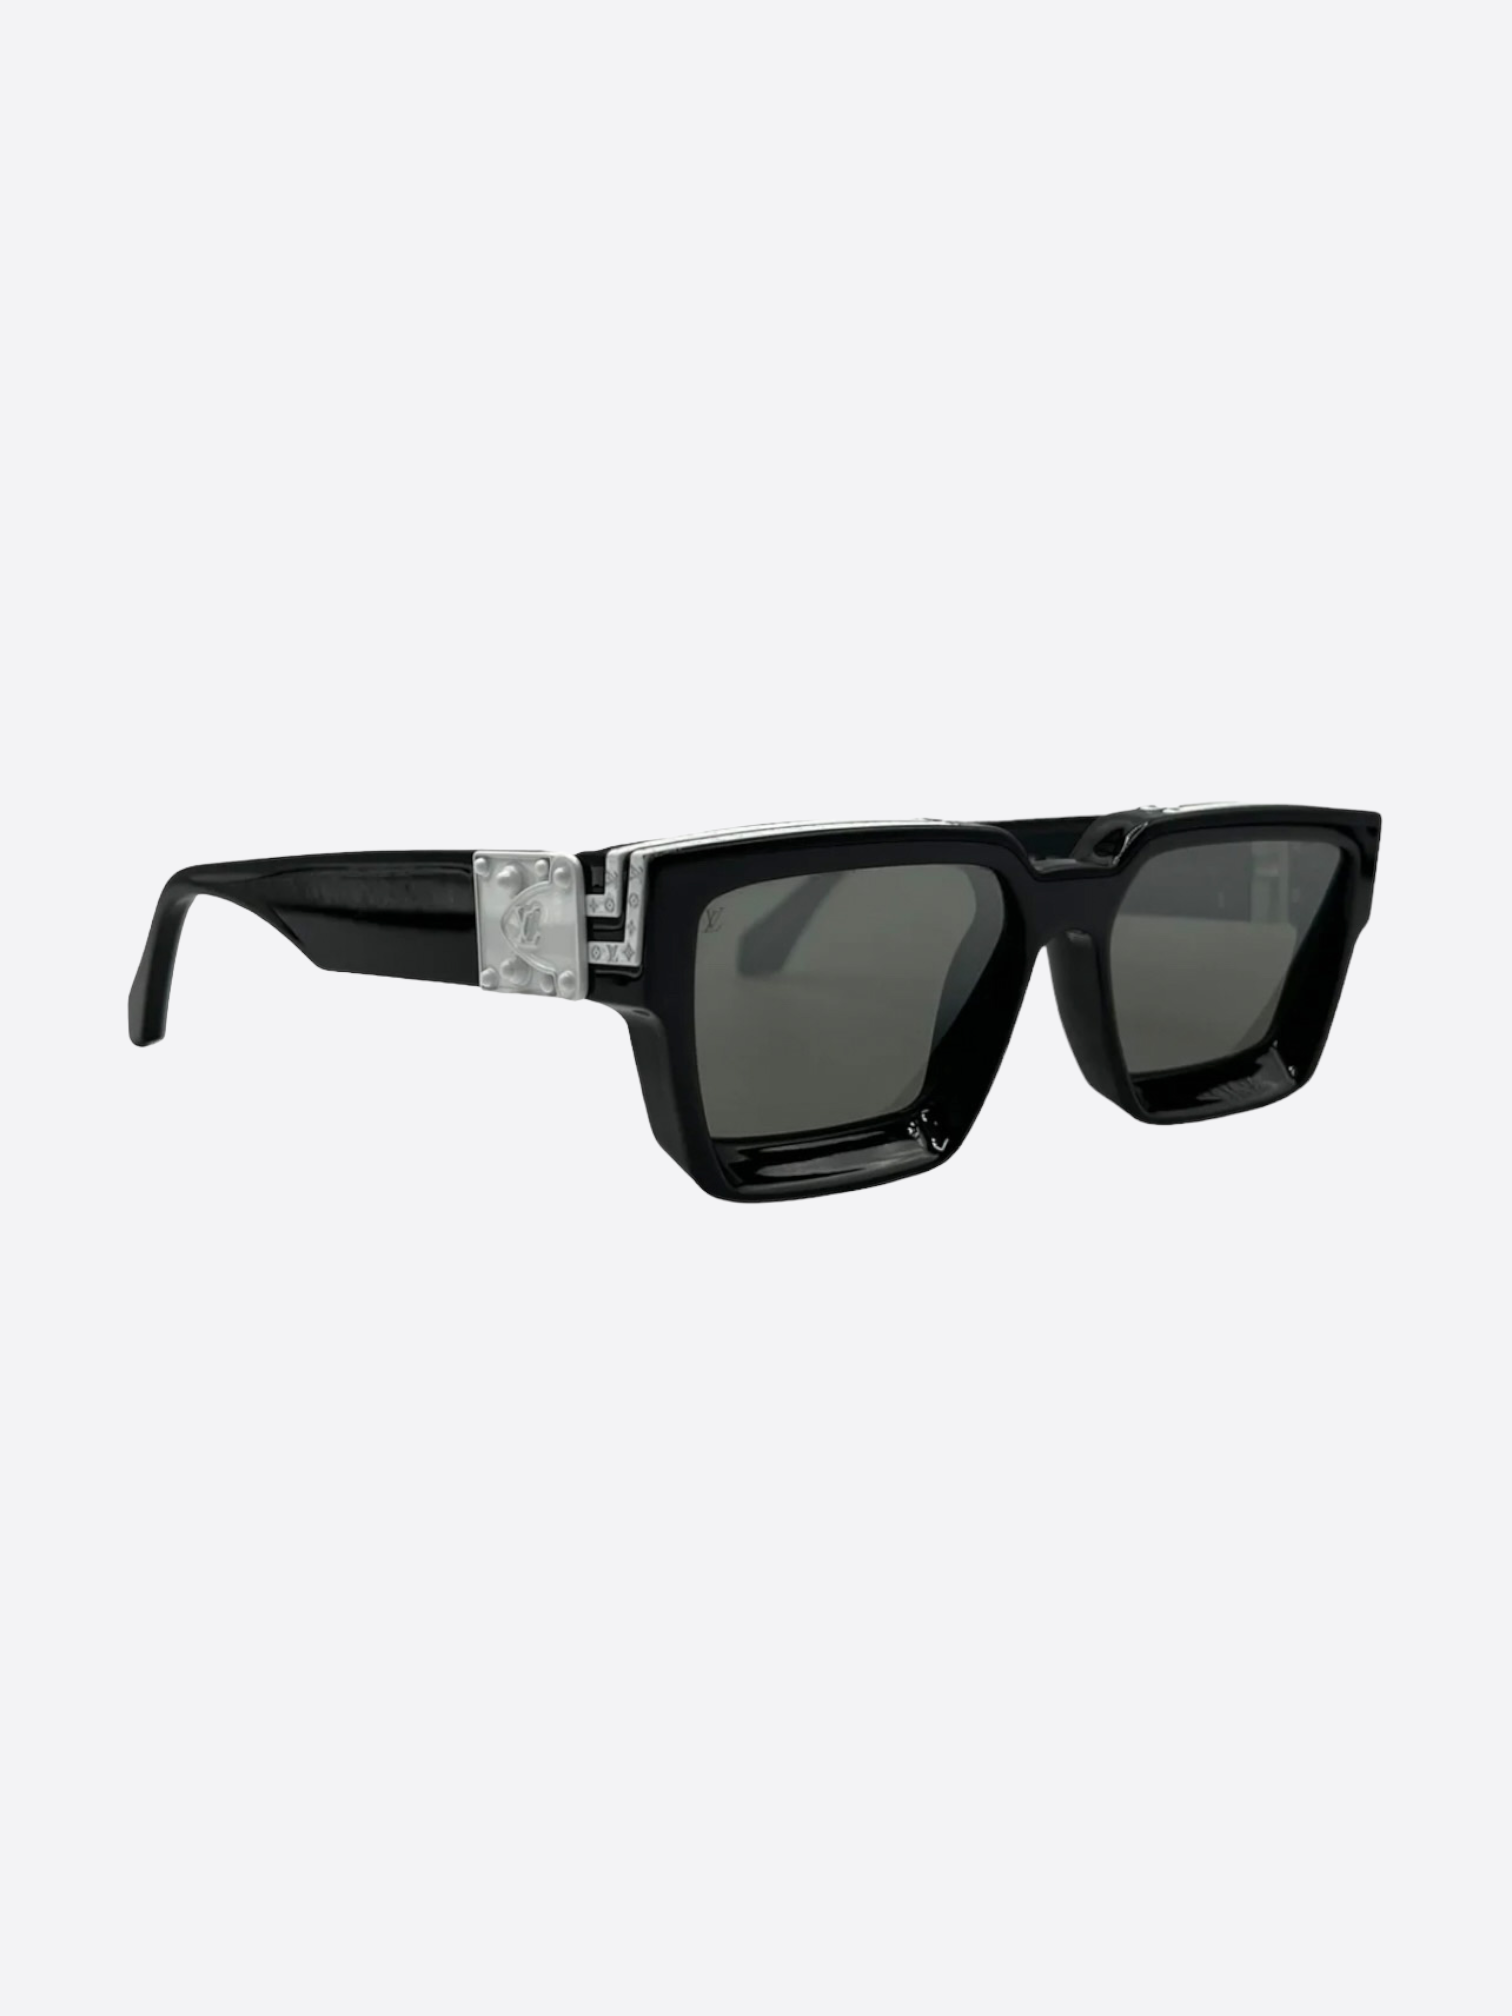 Louis Vuitton Clear Sunglasses - For Sale on 1stDibs